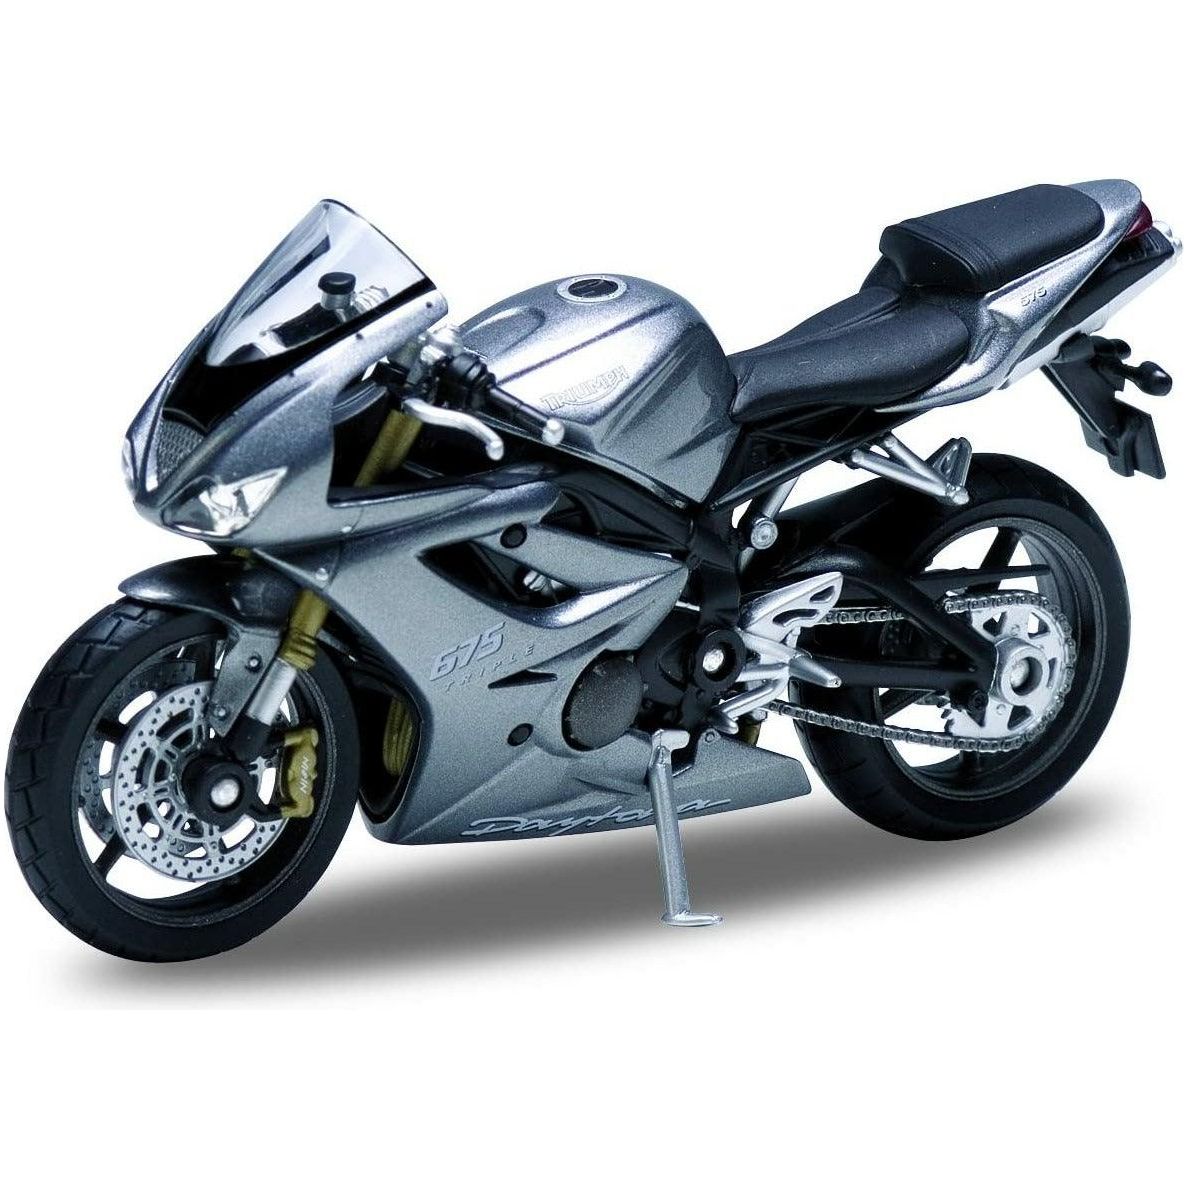 Welly Die Cast Motorcycle Silver Triumph Daytona 675, 1:18 Scale - BumbleToys - 5-7 Years, 8+ Years, Bike, Boys, Motorcycle, Pre-Order